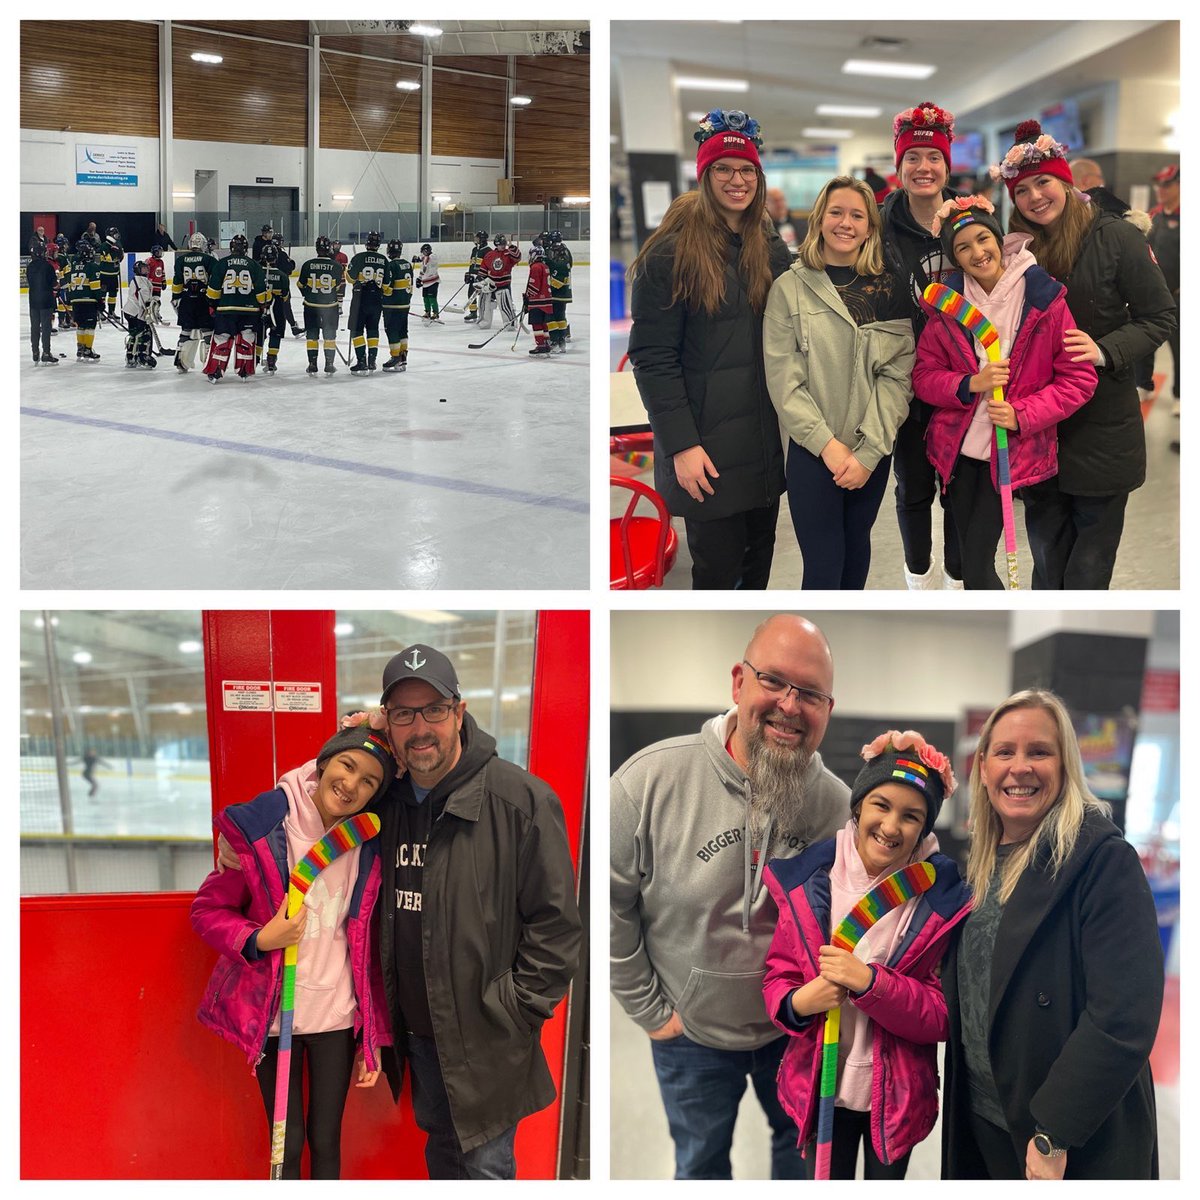 A bad week can be made great when you get to see & even have a phone call with your favourite people @heroshockey @PrideTape @emclark13 Thank you for making Naiya smile and for reminding her that she has incredible friends supporting her #BiggerThanHockey #HockeyIsForEveryone